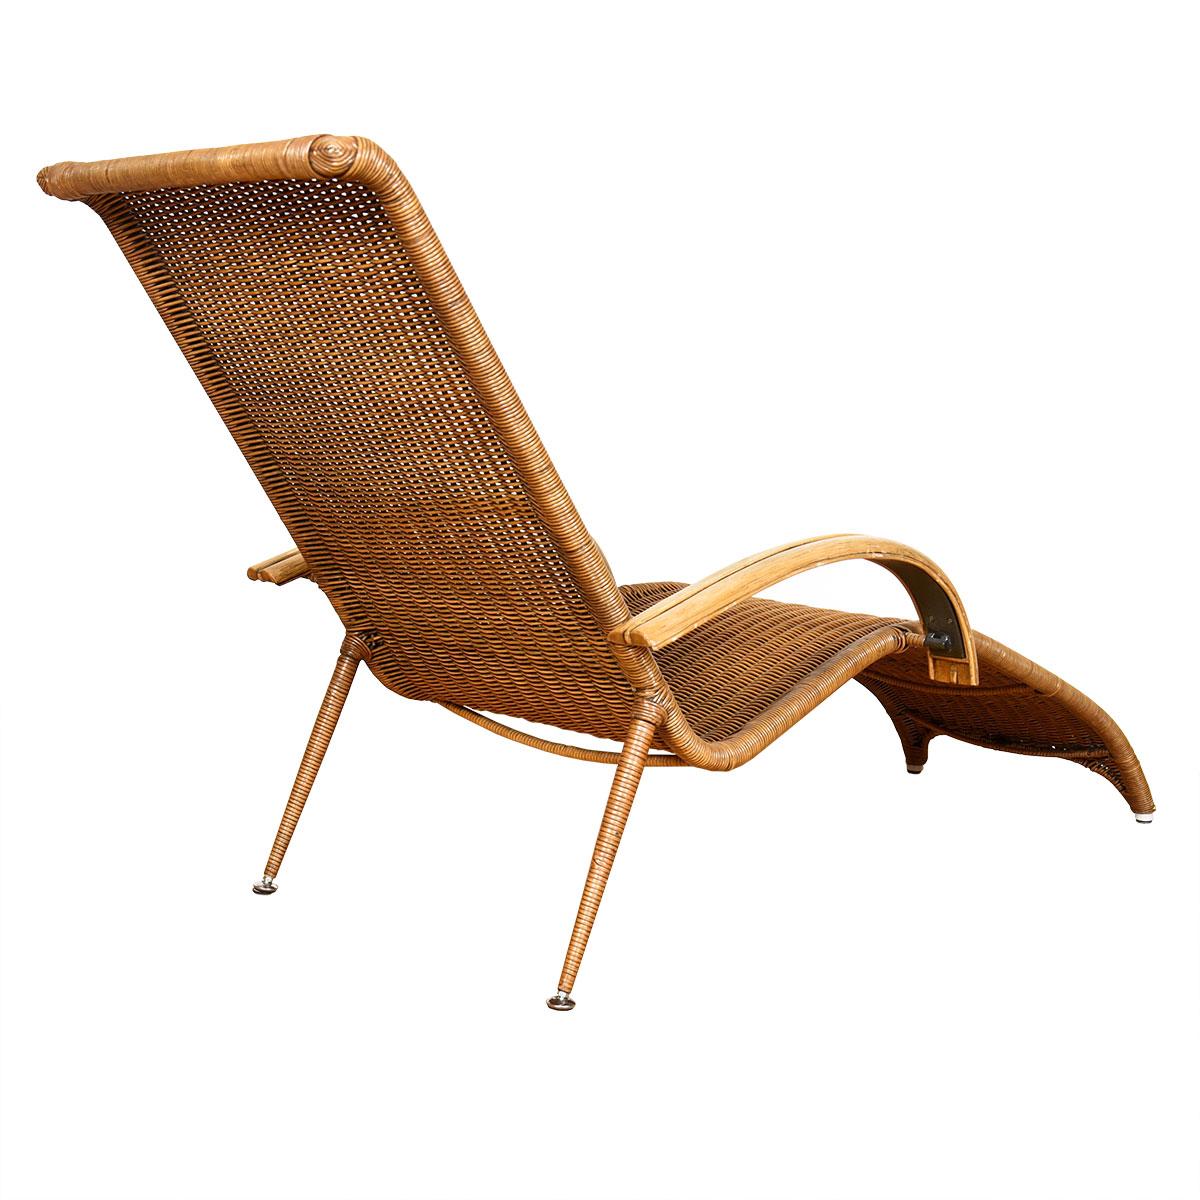 - This rattan chaise lounge makes a statement with its gorgeous profile.
- Sexy, dramatic and functional.
- Curvaceous bentwood arms.
- Splayed wooden back legs.
- Very high-quality chaise built to last and with comfort in mind.
- Old-school steel